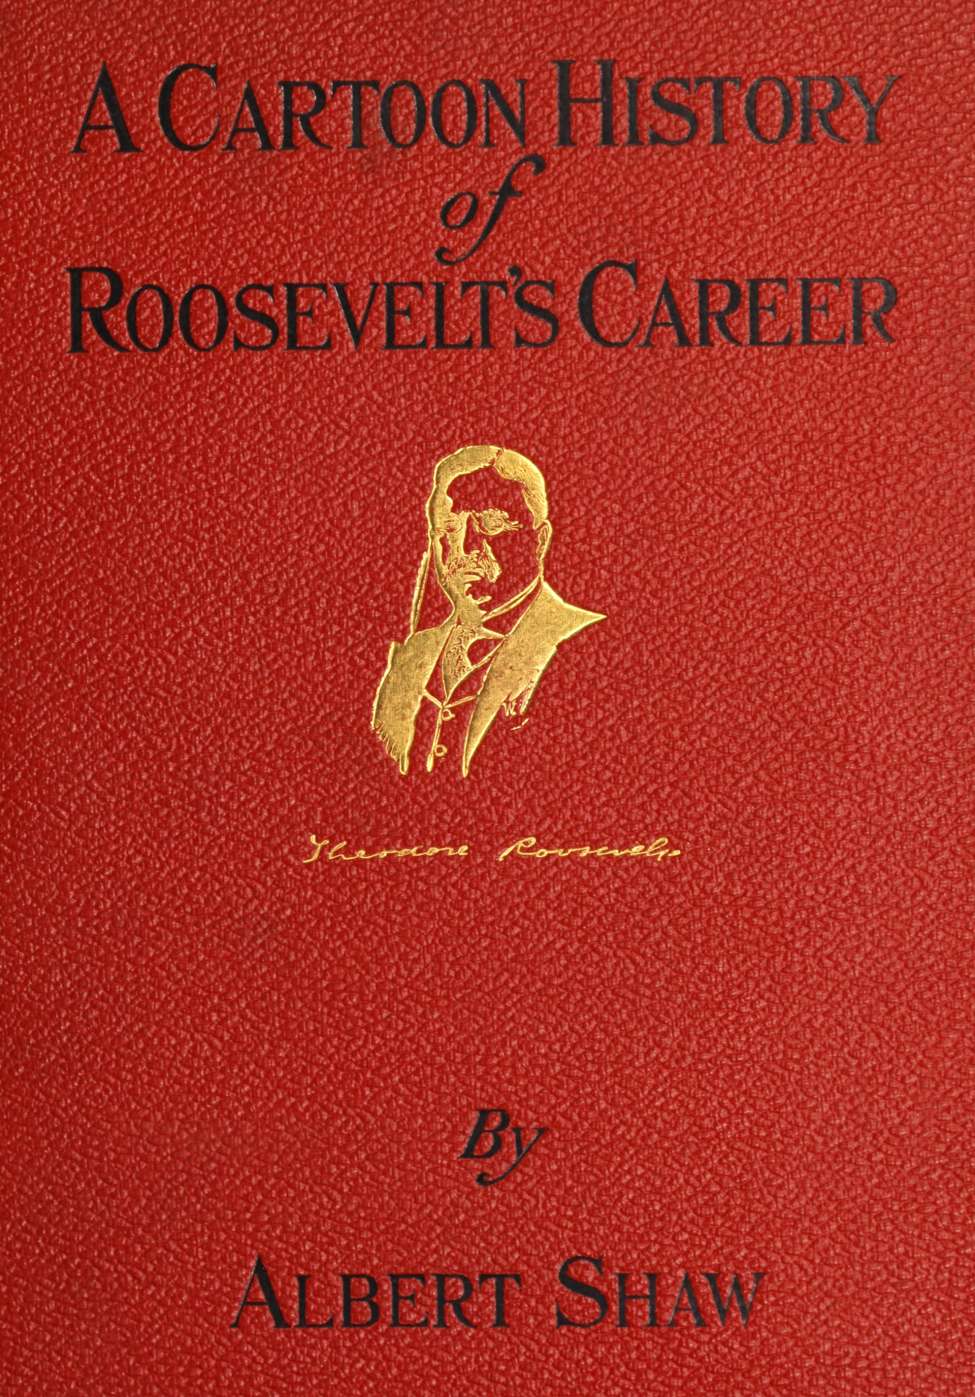 Book Cover For Cartoon History of Roosevelt's Career